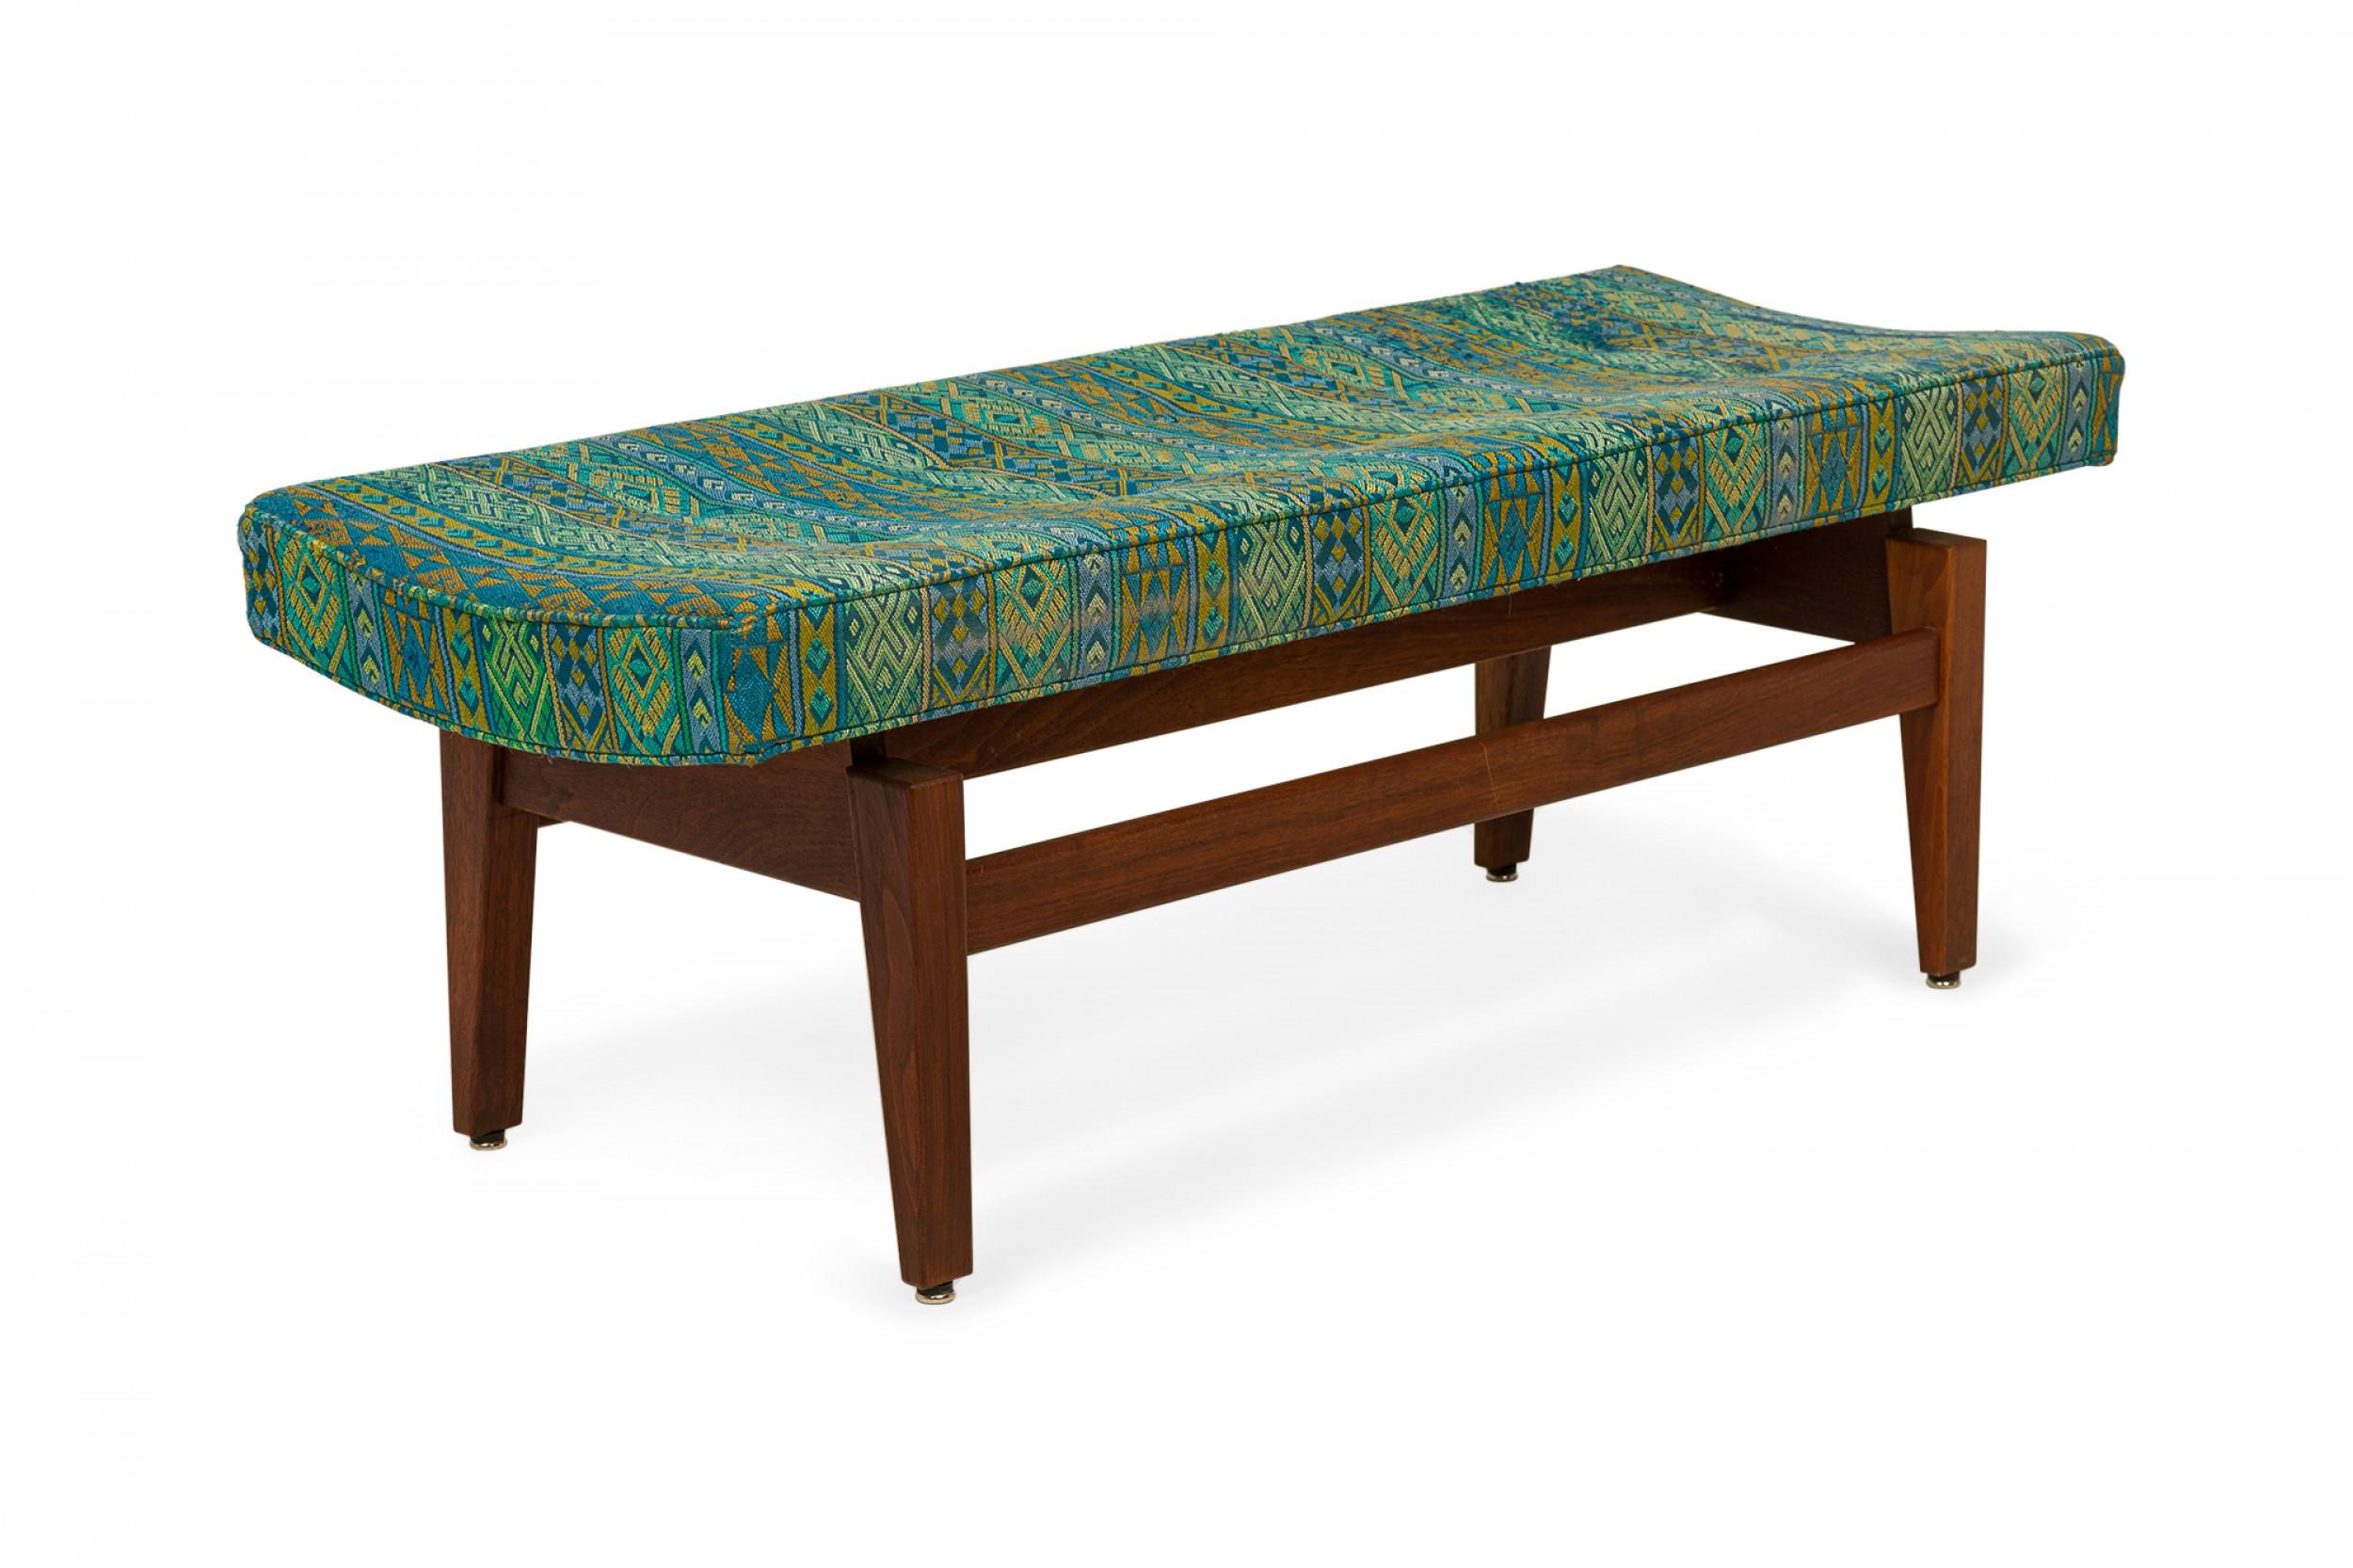 Jens Risom Danish Blue and Green Southwestern Pattern Upholstery In Good Condition For Sale In New York, NY